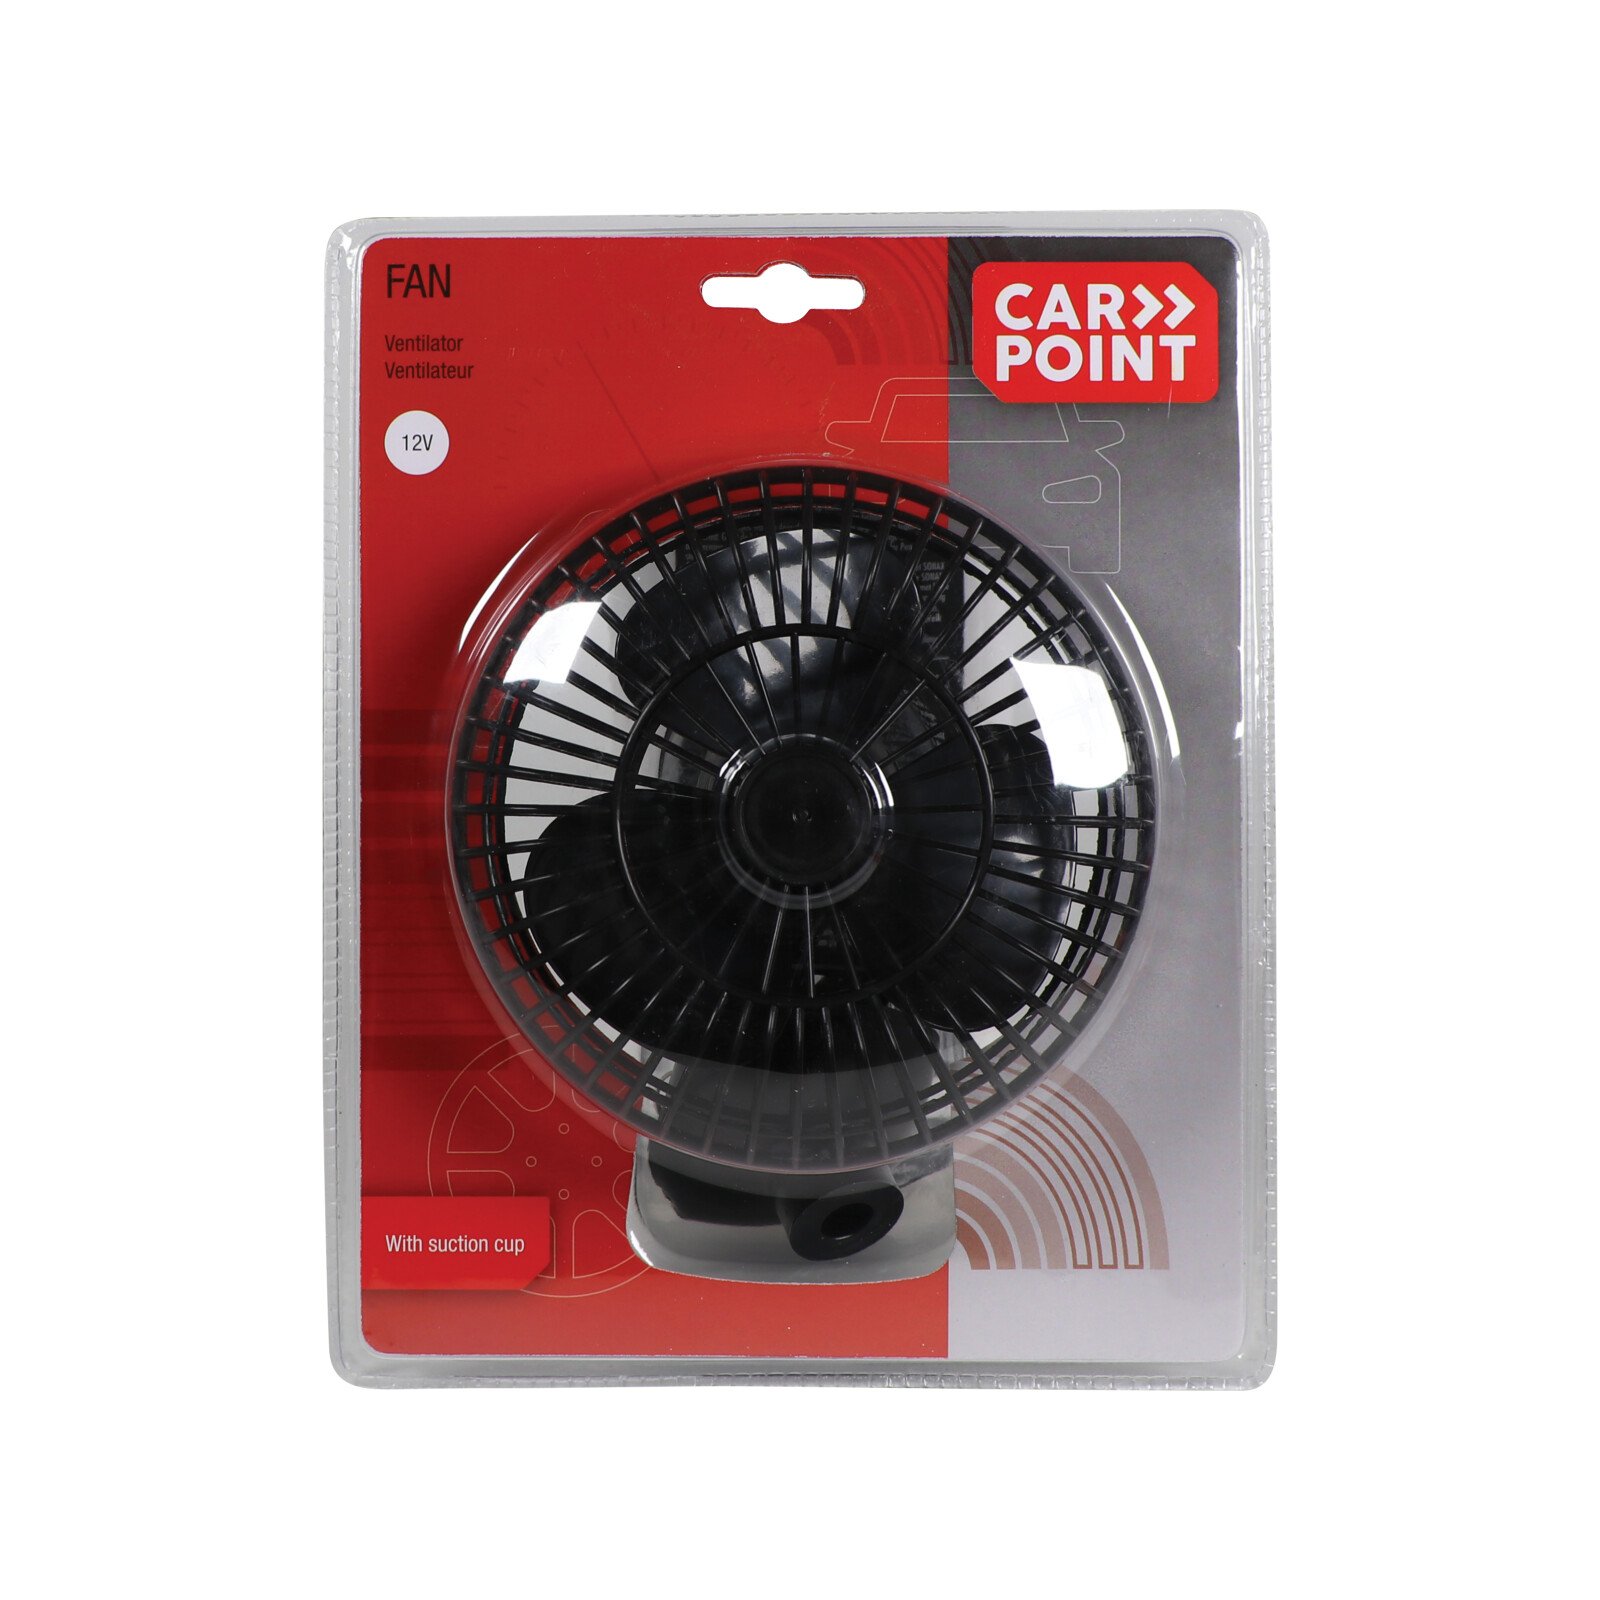 Fan with suctionpad fastening 12V thumb